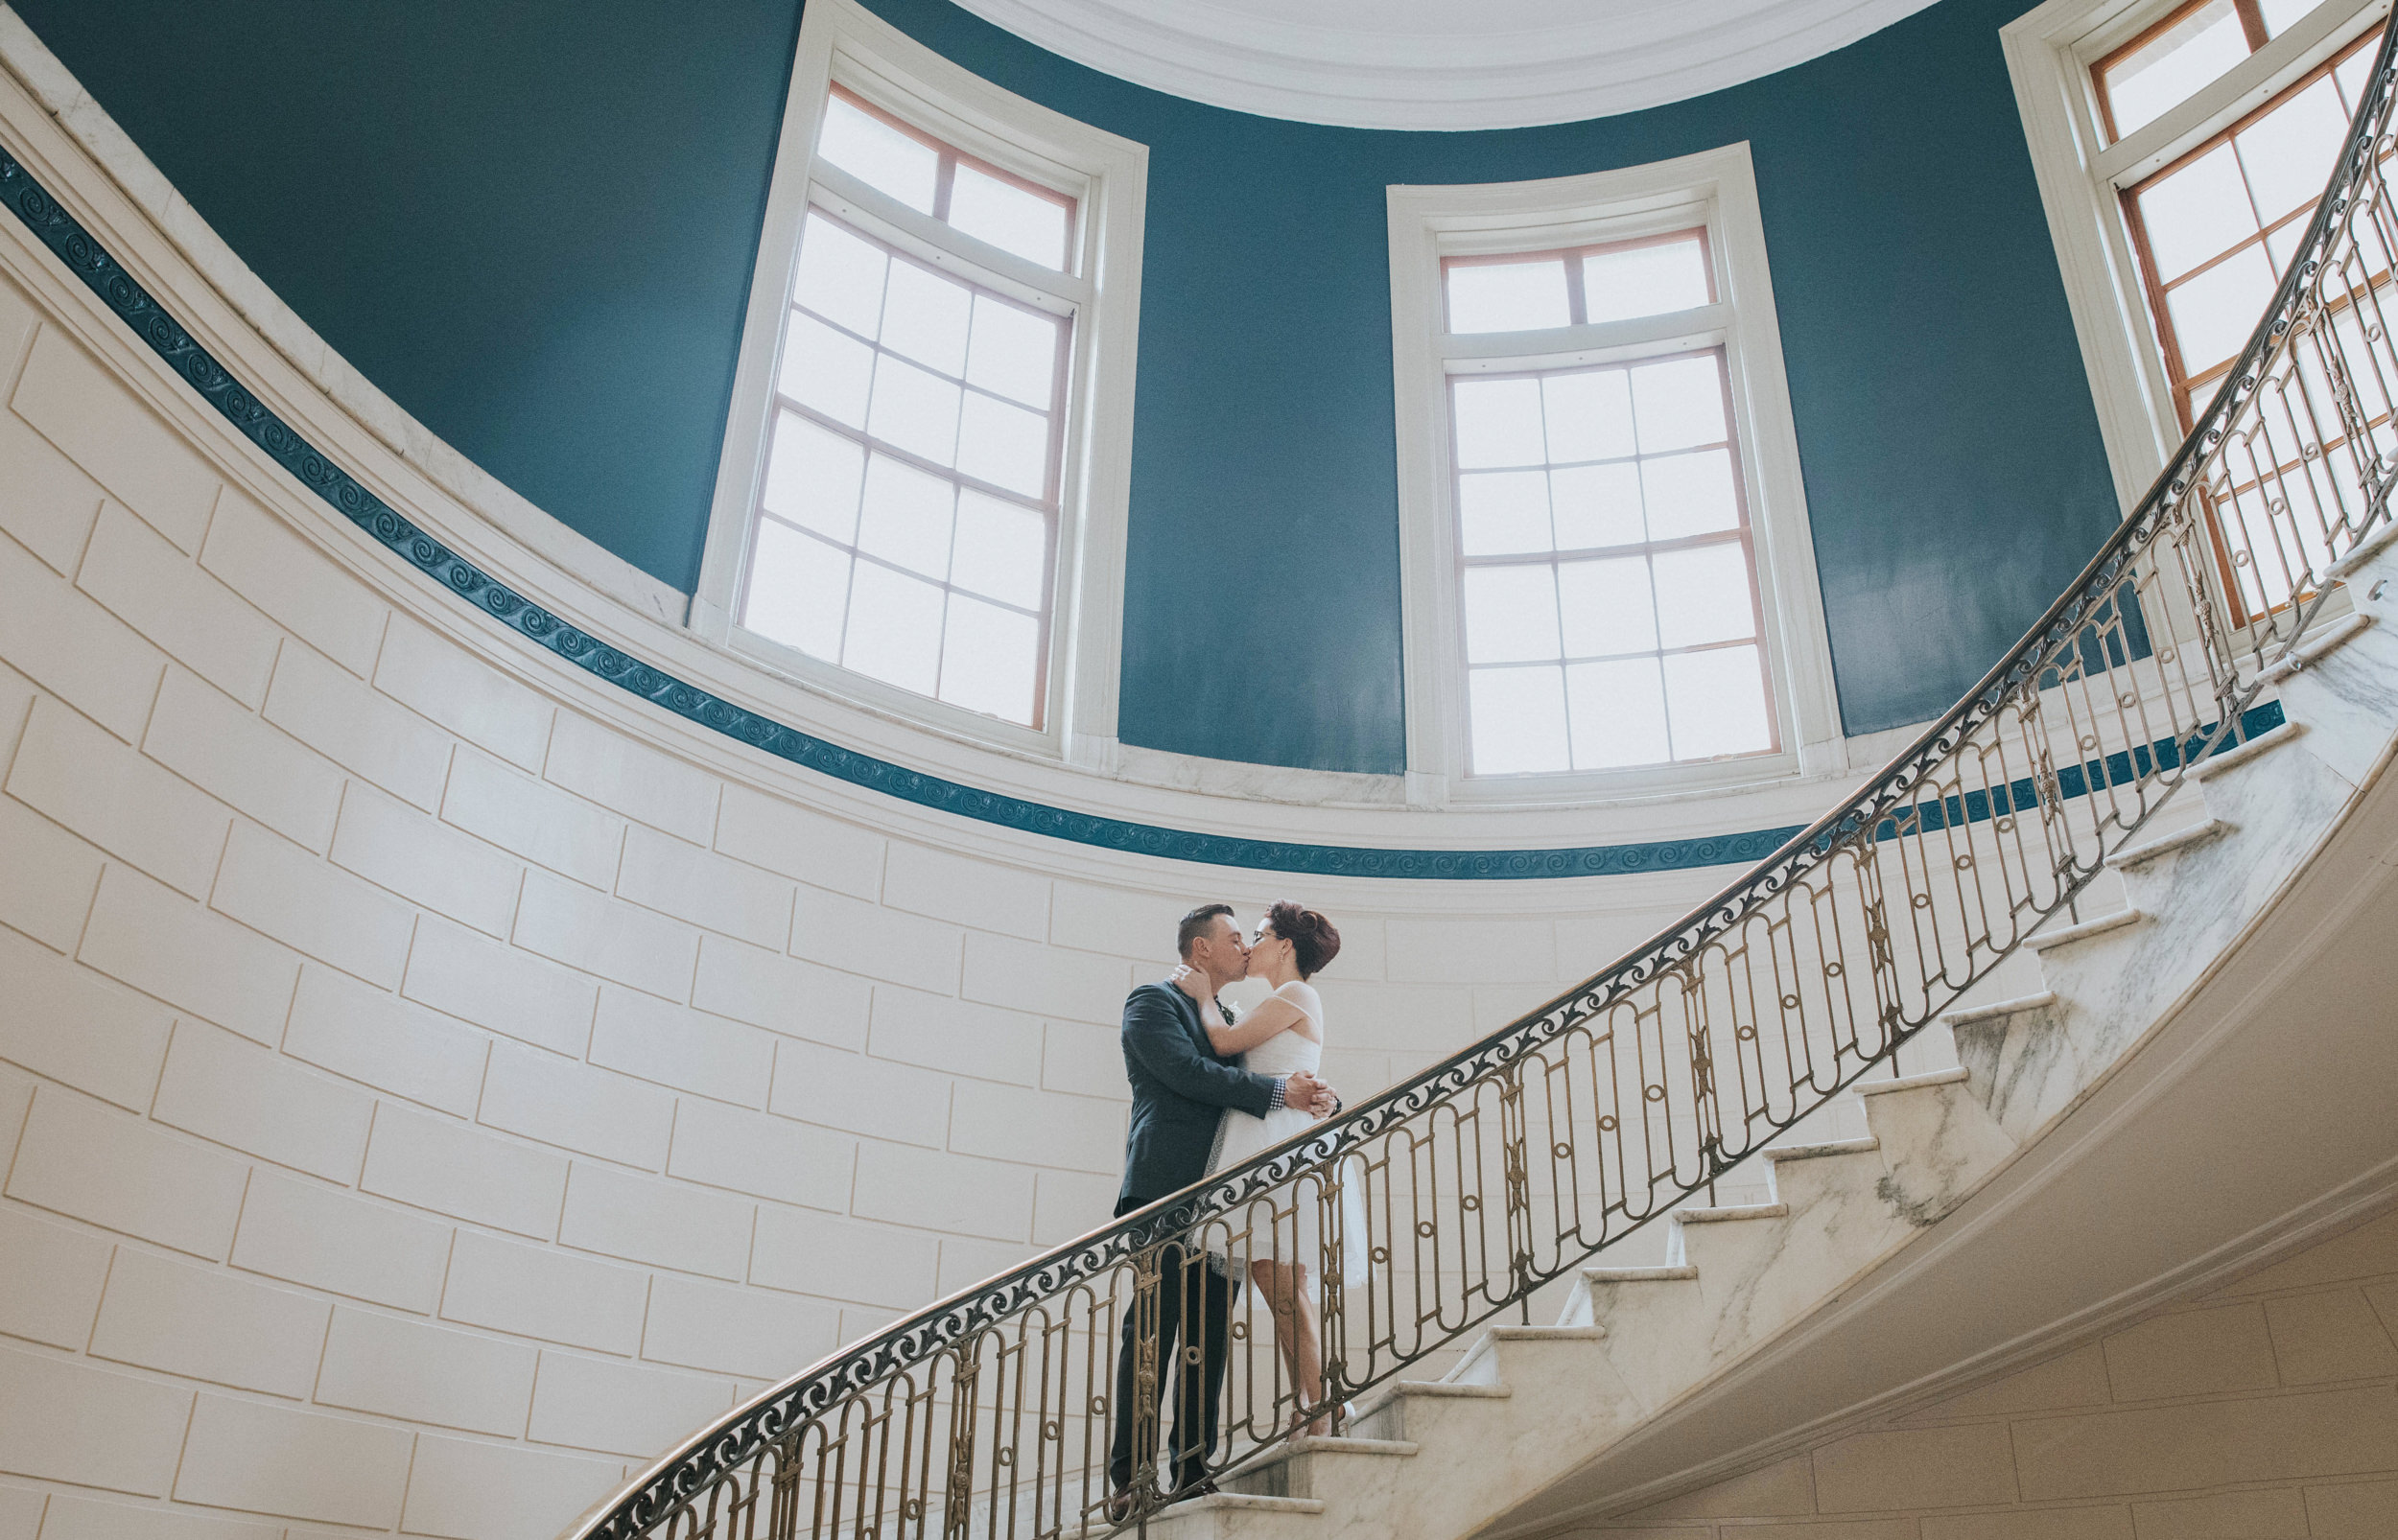  a couple in portland maine's city hall after getting married 